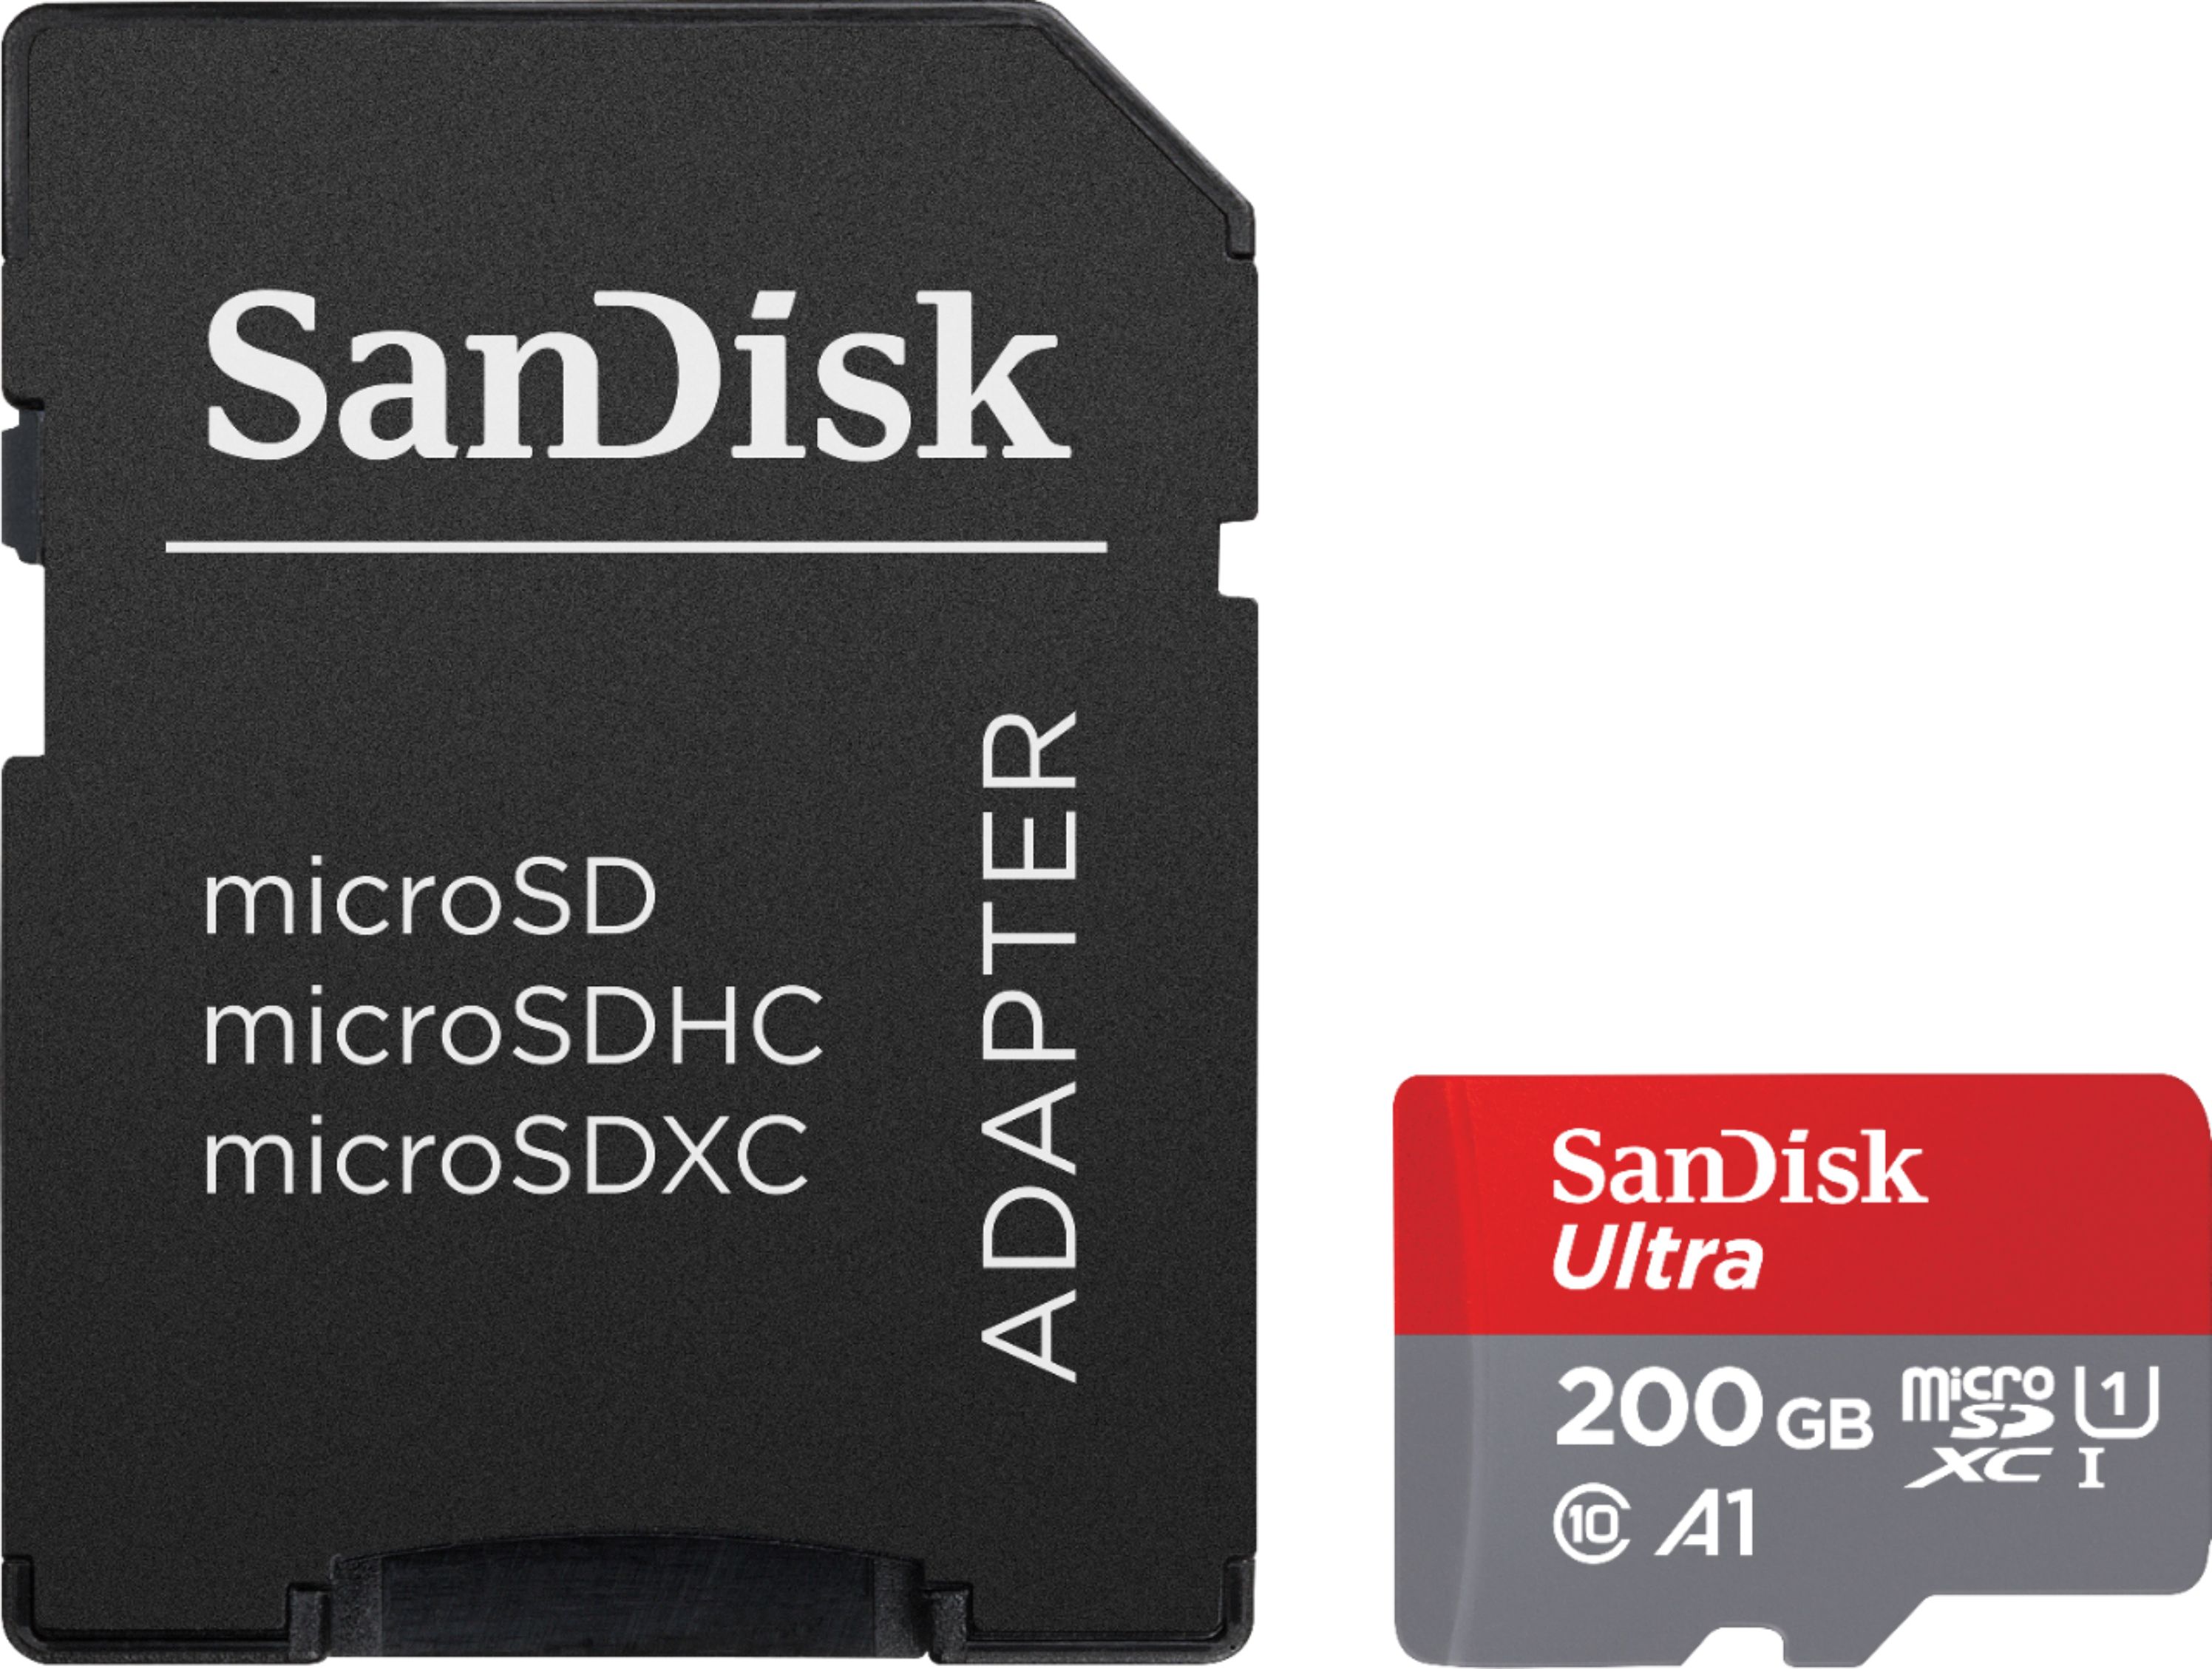 100MBs A1 U1 C10 Works with SanDisk SanDisk Ultra 200GB MicroSDXC Verified for Yezz Andy A5 by SanFlash 